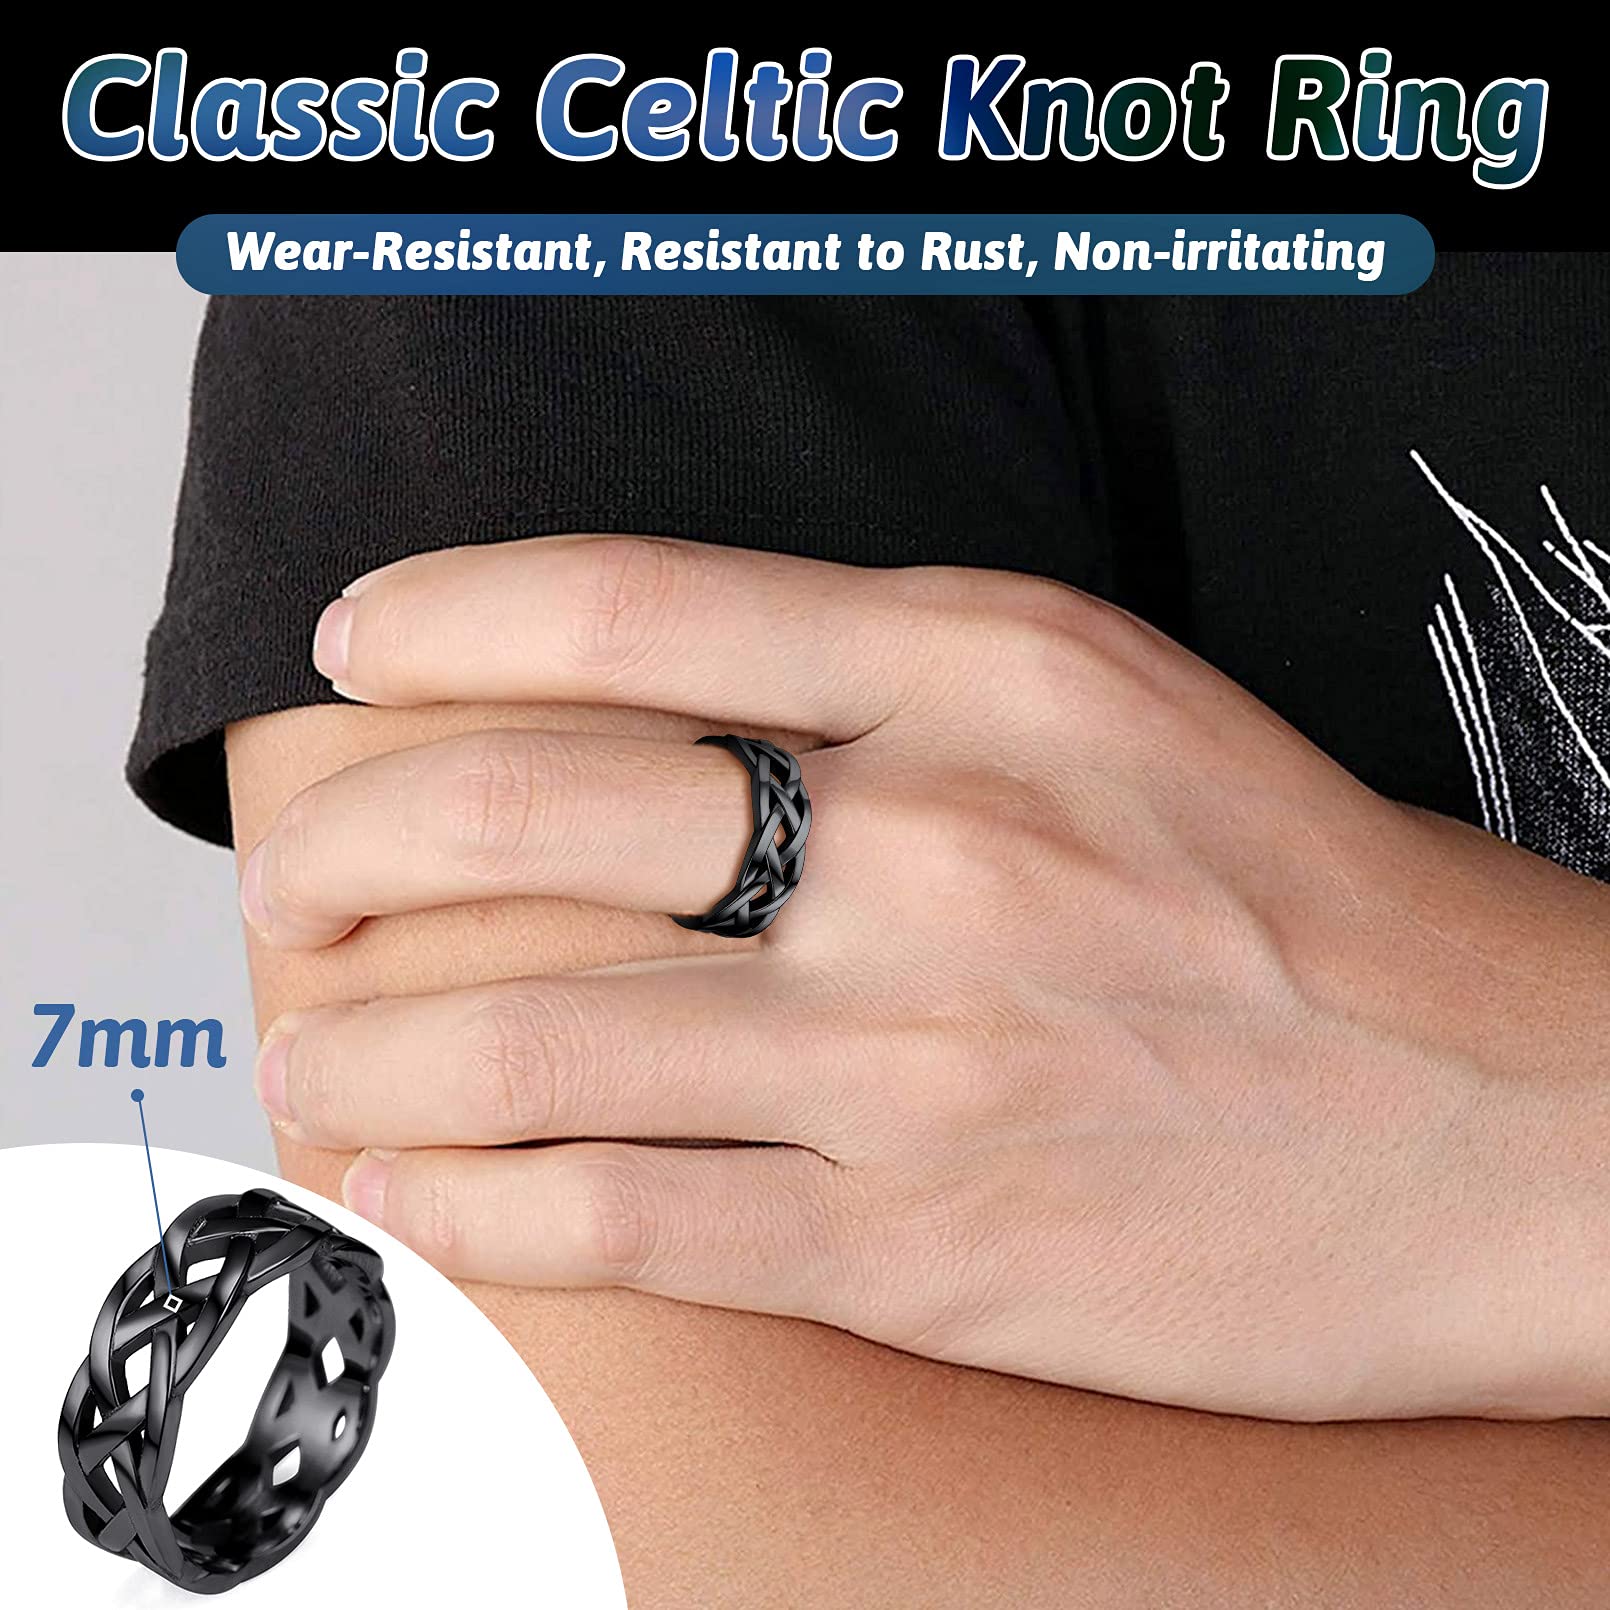 FaithHeart Celtic Knot Band Rings for Men Women, Stainless Steel/18K Gold Plated Viking Wedding Bands with Delicate Gift Packaging